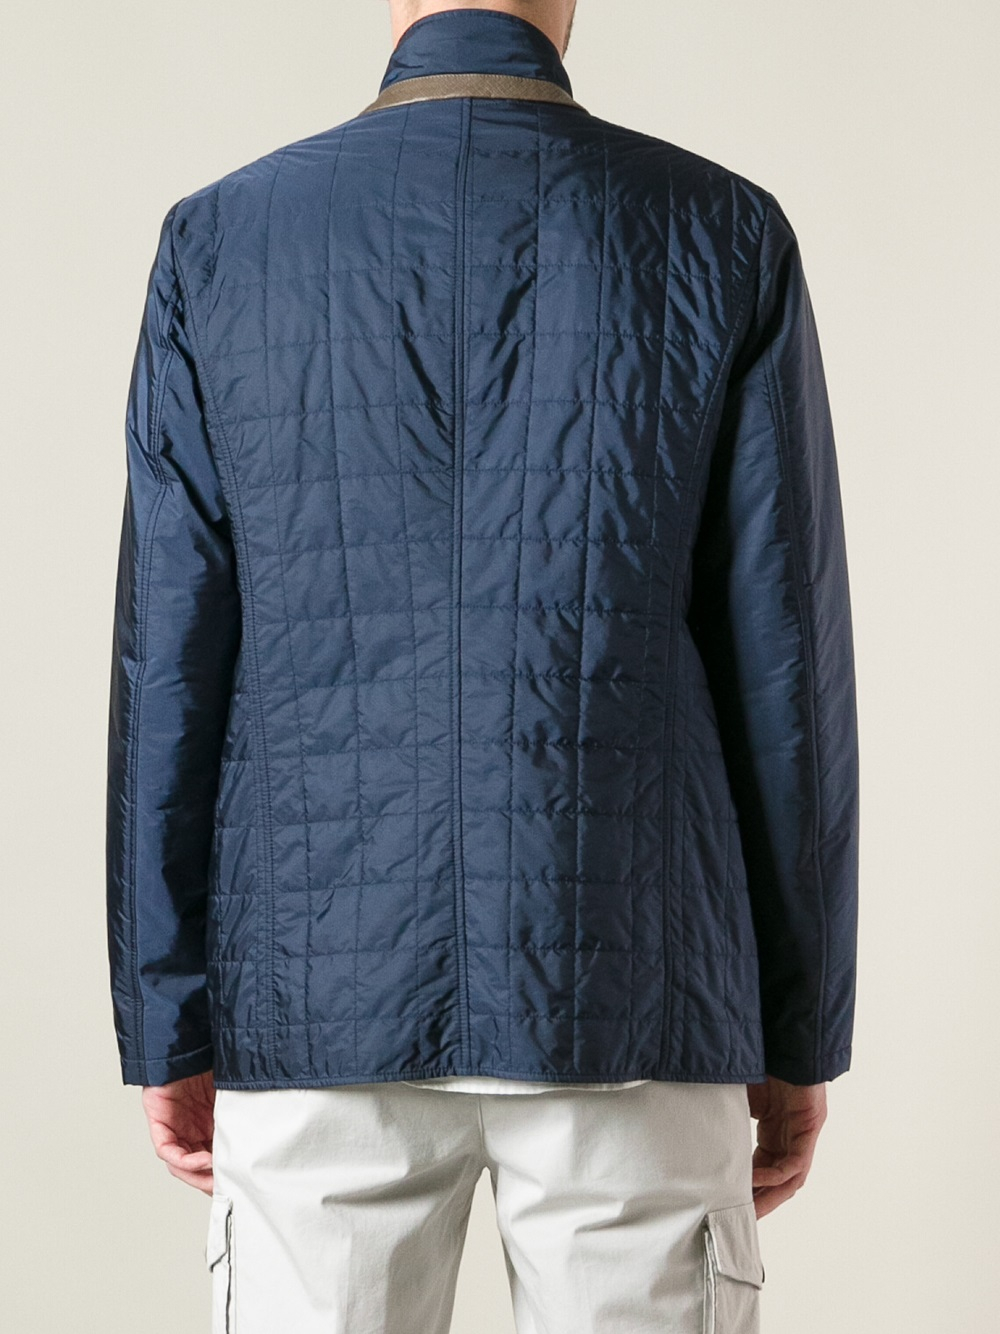 Canali Quilted Padded Jacket in Blue for Men - Lyst